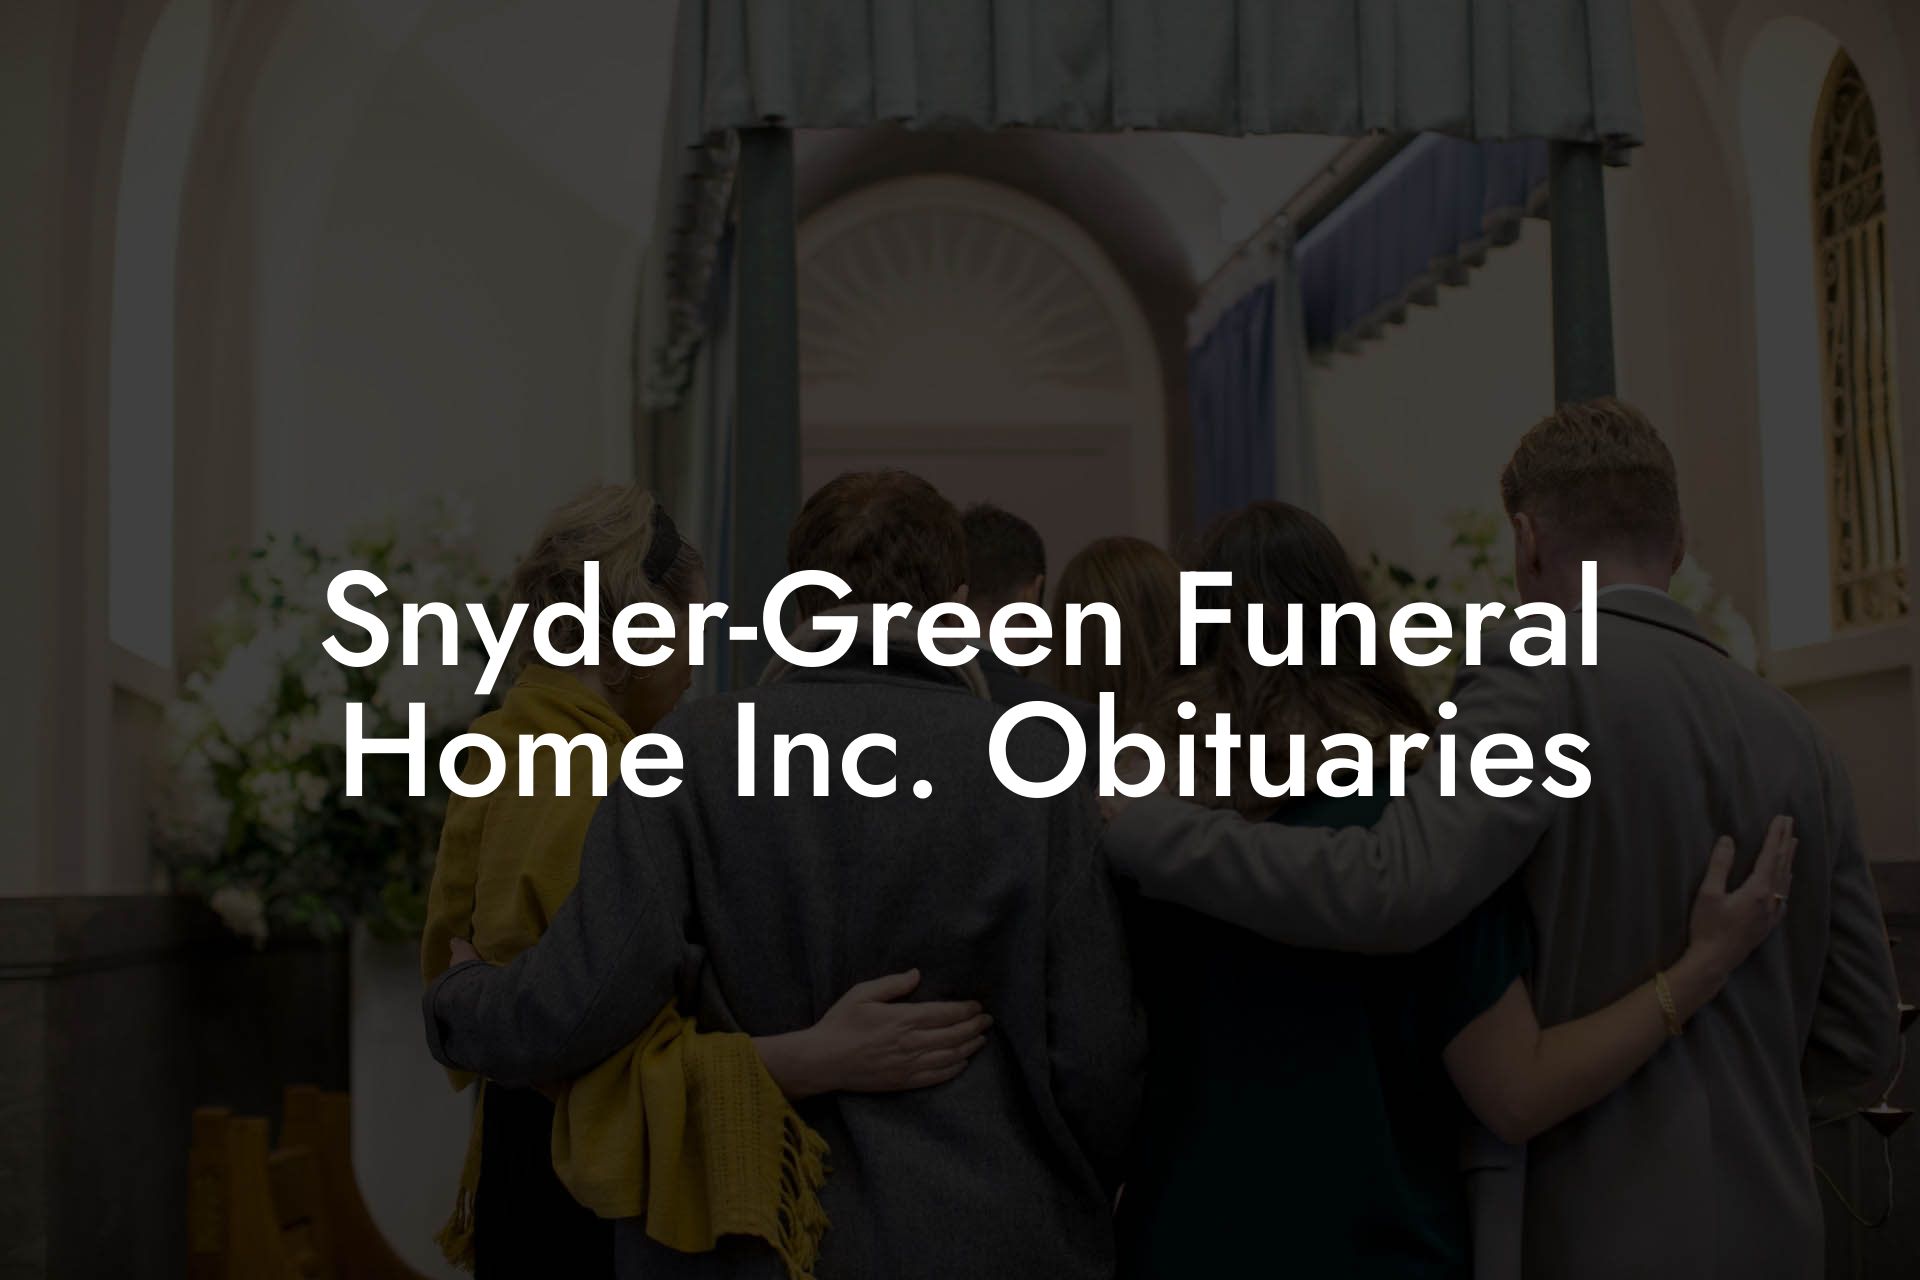 Snyder-Green Funeral Home Inc. Obituaries